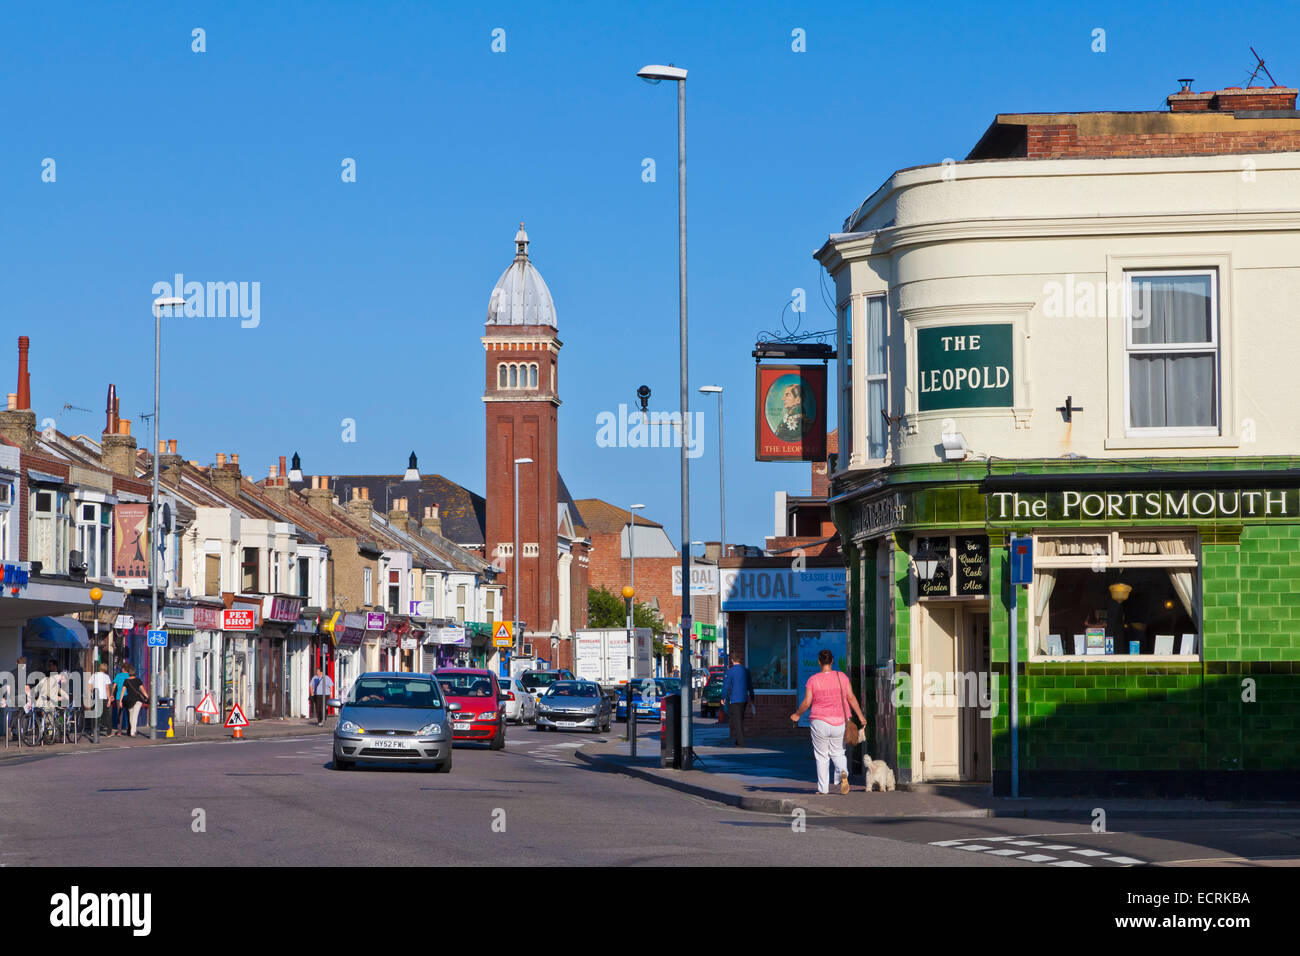 SHOPS AND PUBS AT ALBERT ROAD, SOUTHSEA QUARTER, PORTSMOUTH, HAMPSHIRE, ENGLAND, GREAT BRITAIN Stock Photo